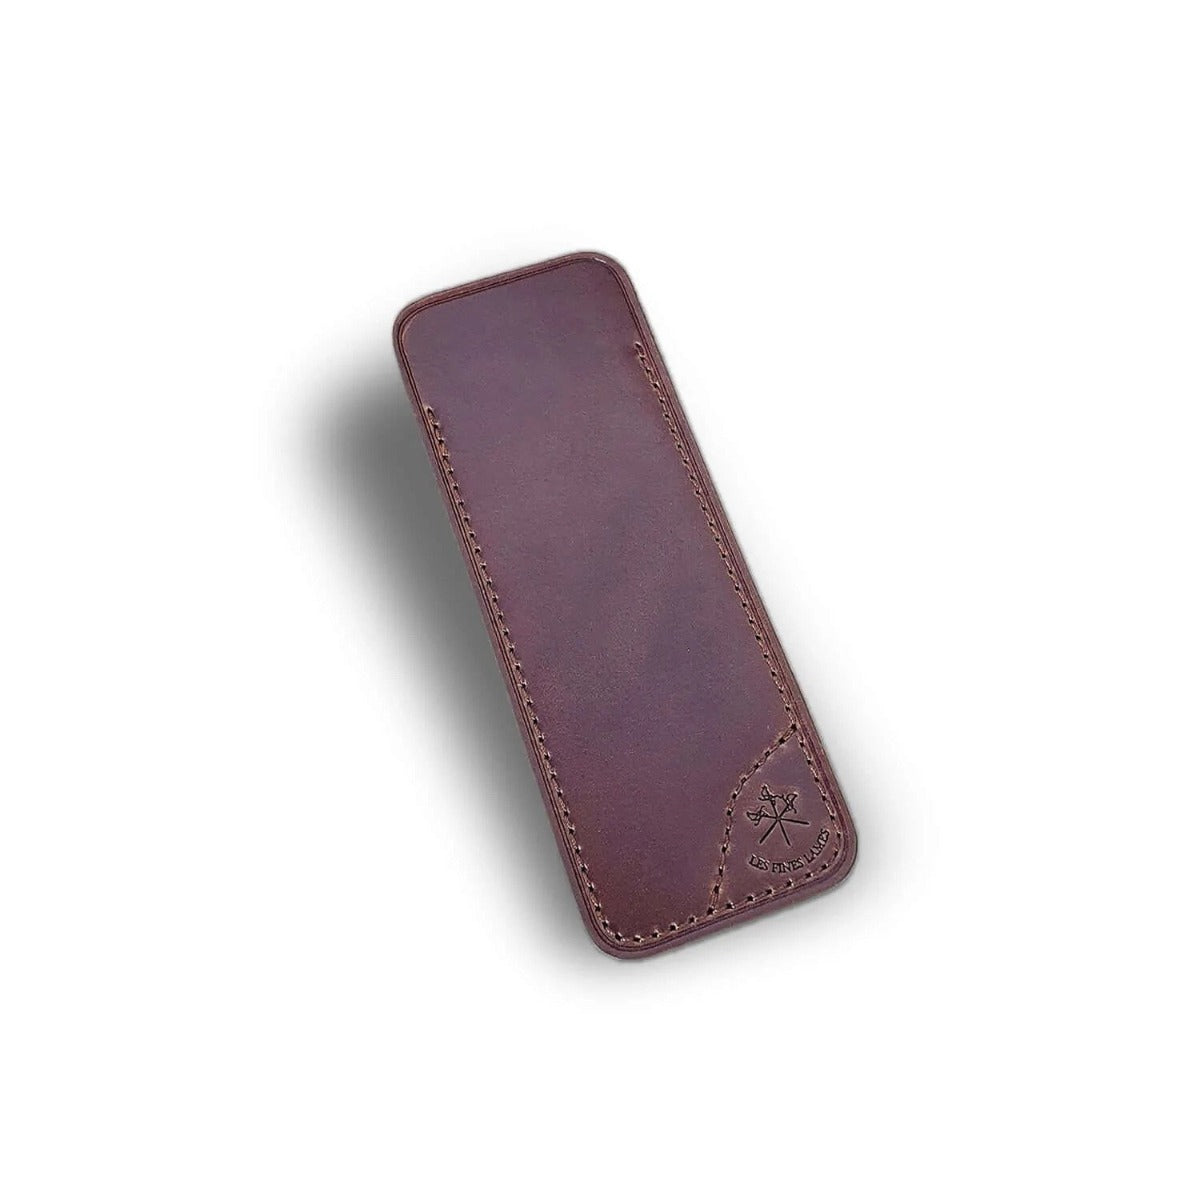 A Cigar Knife Tan Leather Case wallet from KirbyAllison.com on a white background.